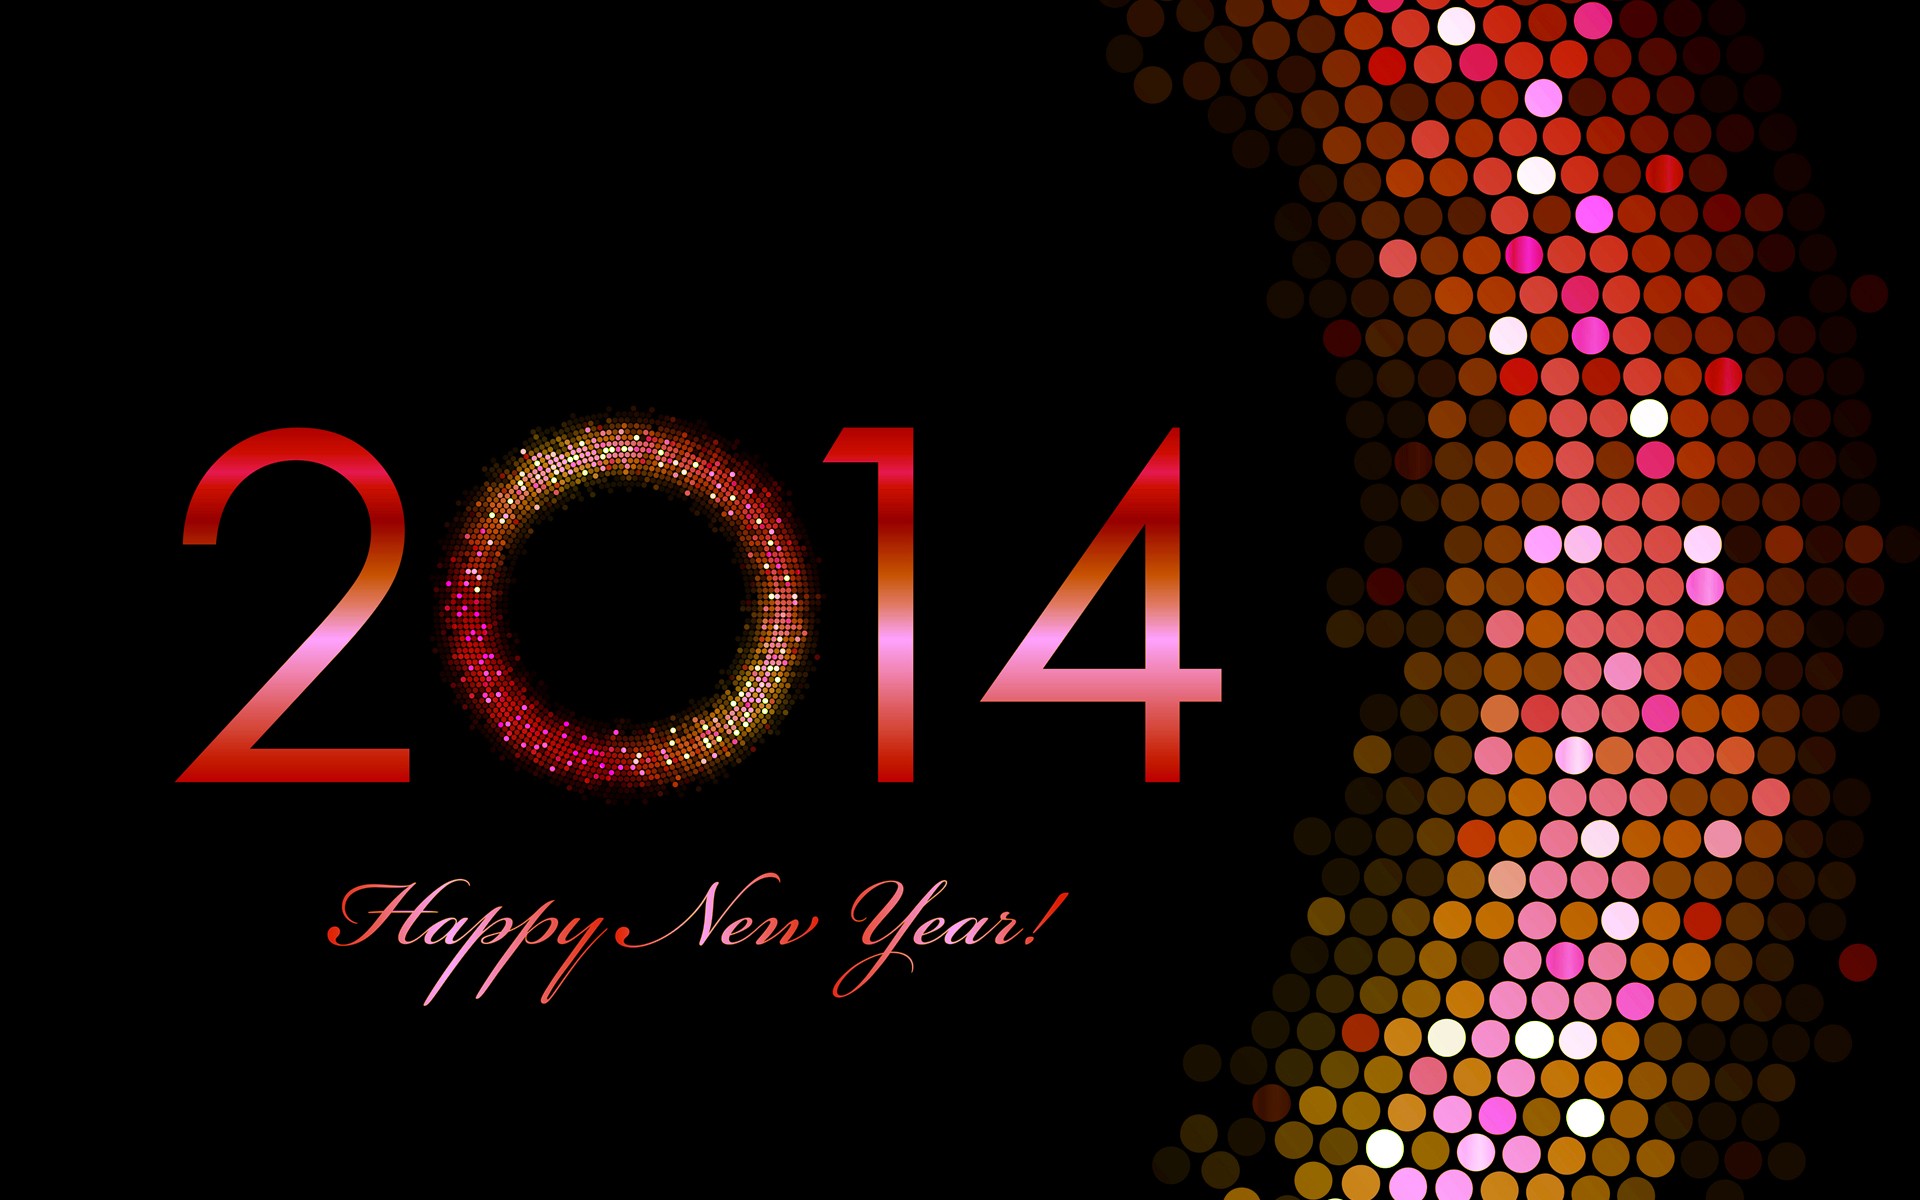 New years eve wallpaper 2014